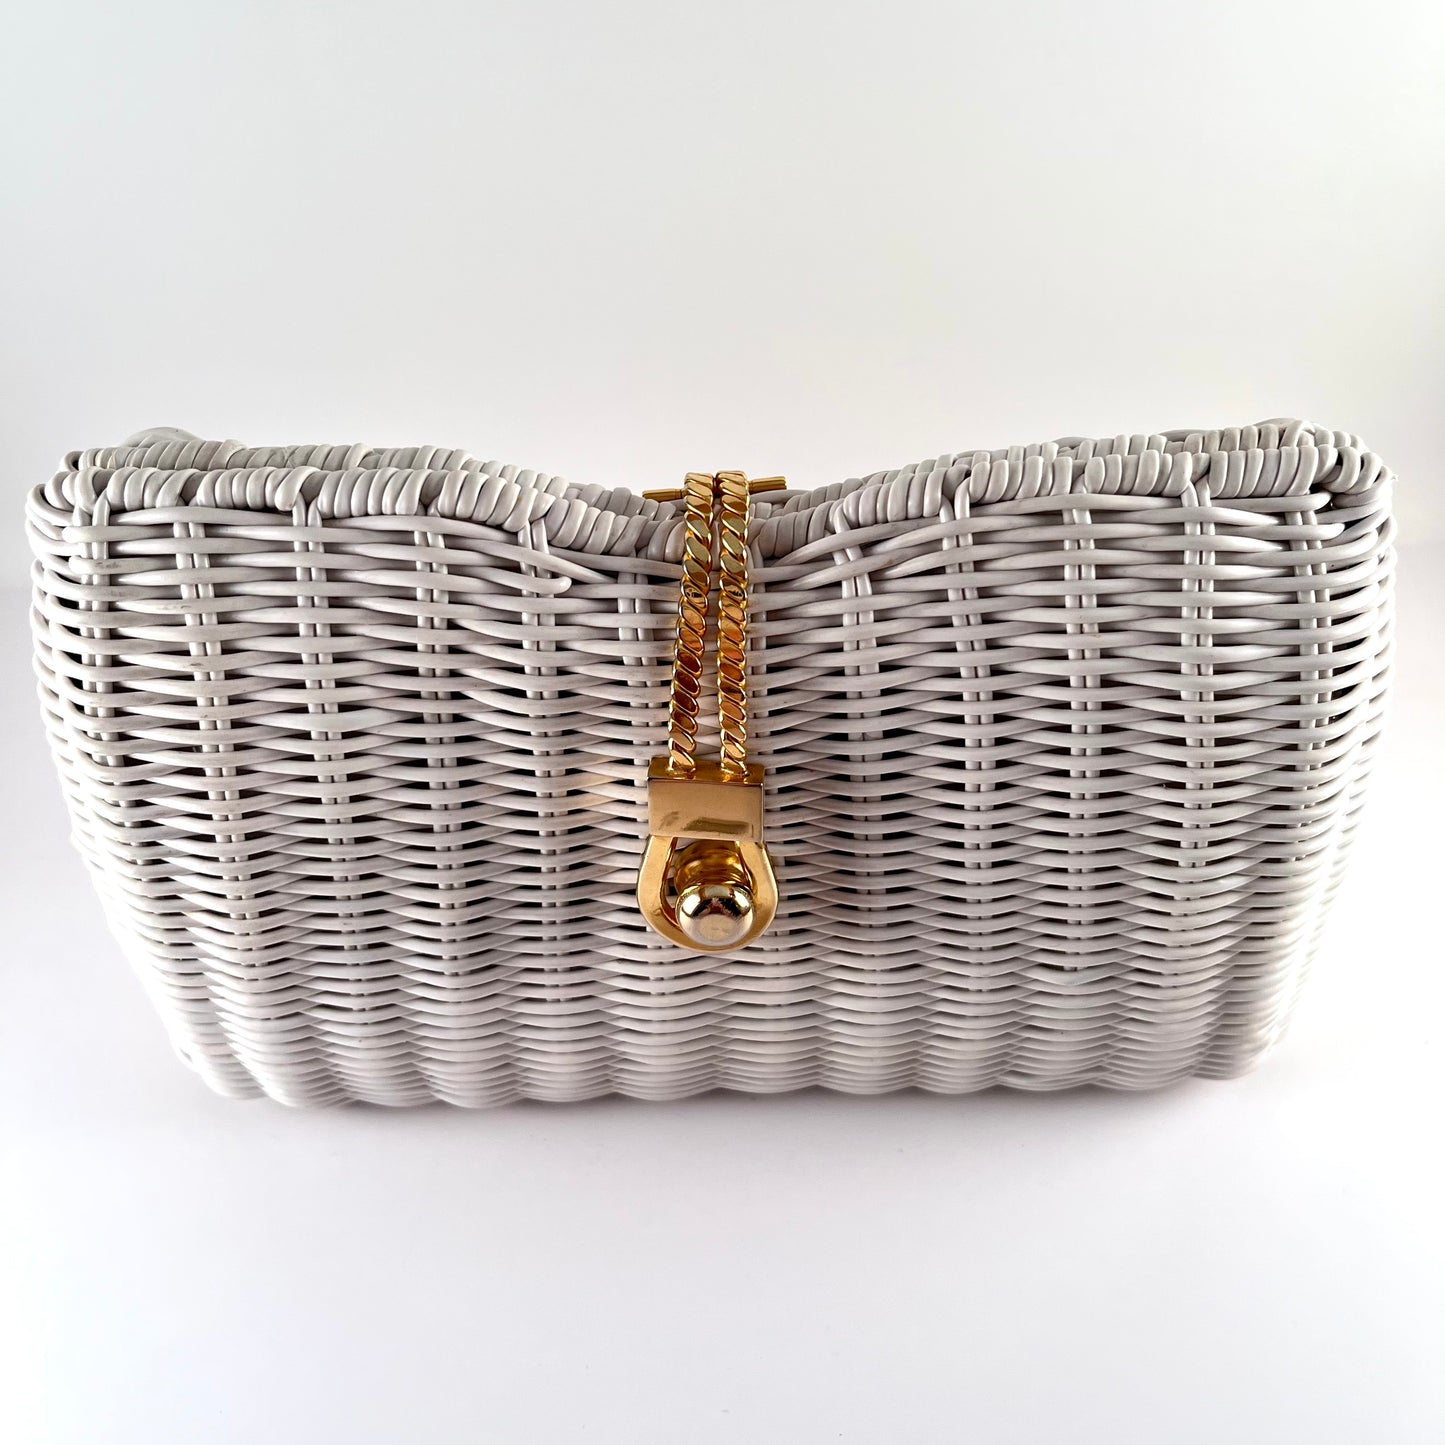 Late 80s/ Early 90s White Wicker Purse